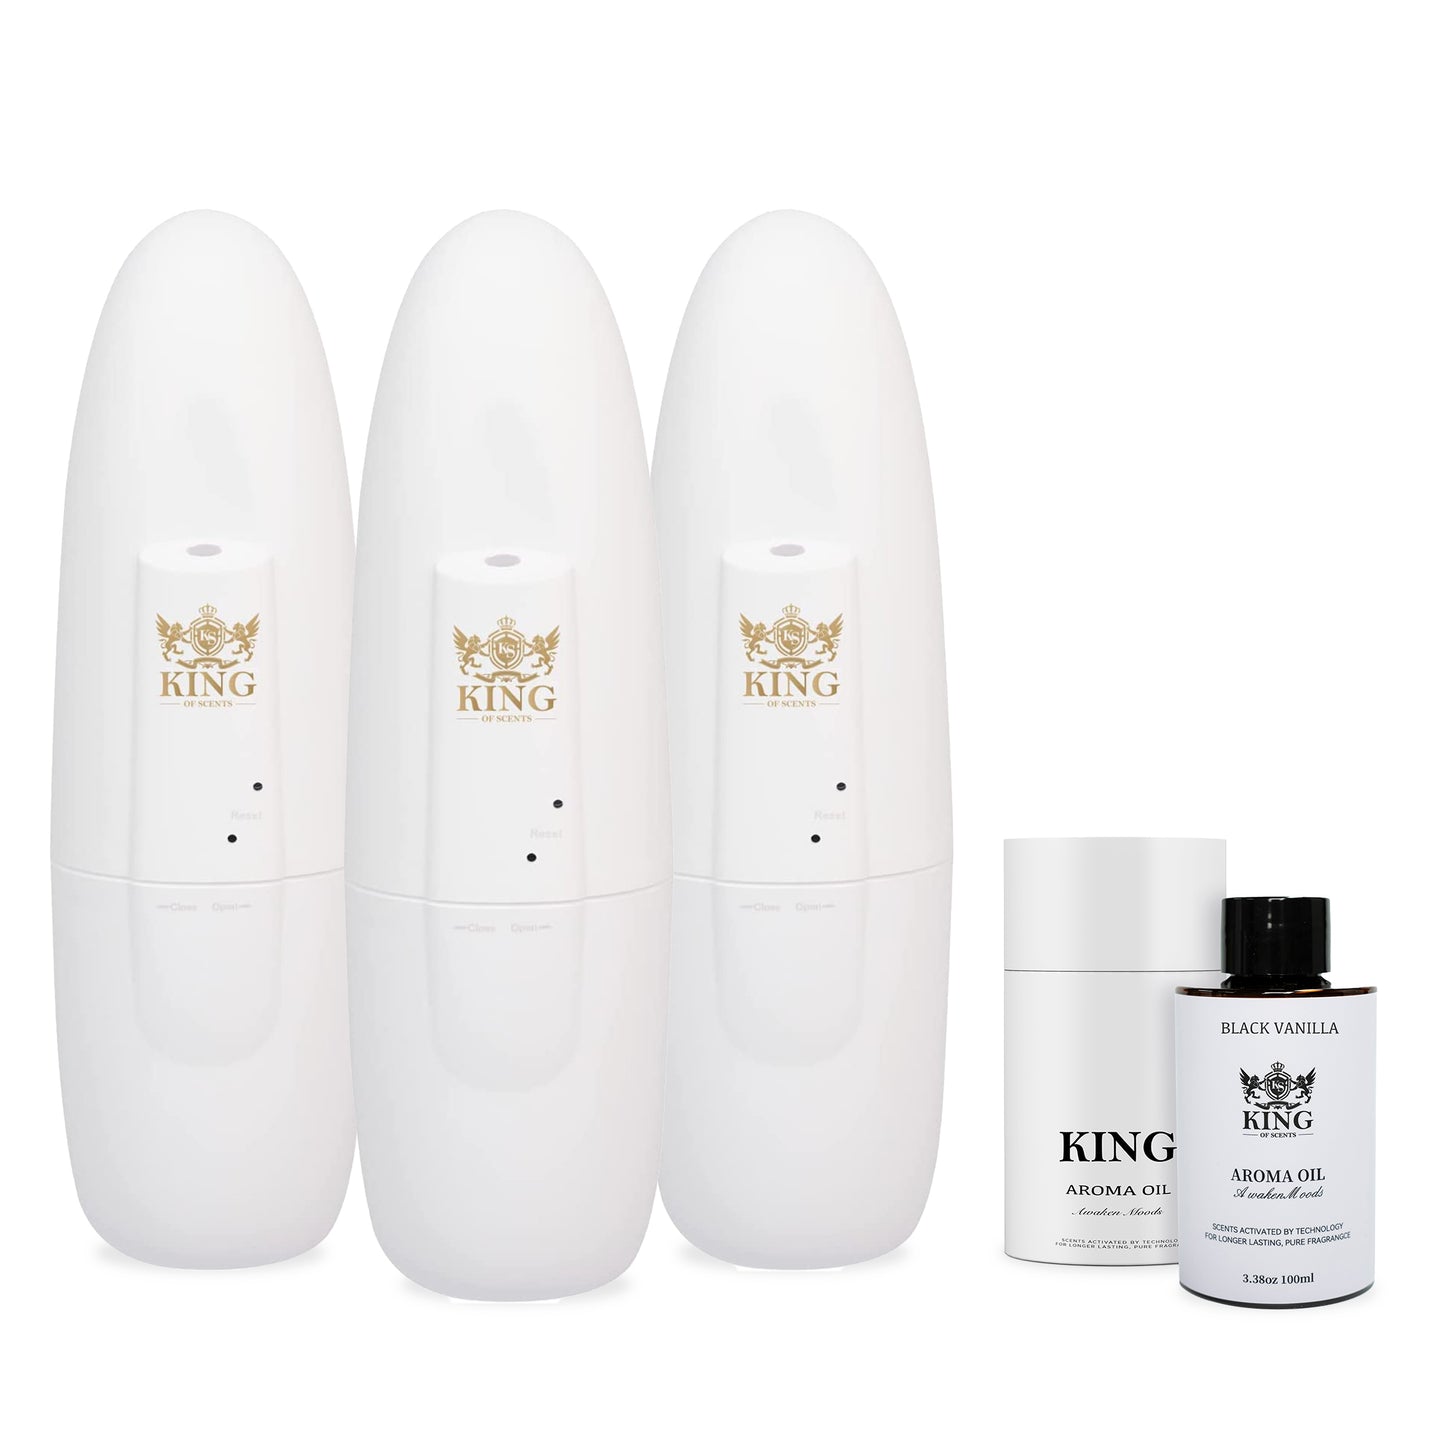 King of scents Aroma Diffuser - Up to 500 Sq. FT Coverage - Nanotechnology Plug in Oil Diffuser for Essential Oils -for Home and Office - Wall Silent & Waterless Oil Diffuser (White+ black ) (Pack of 3)